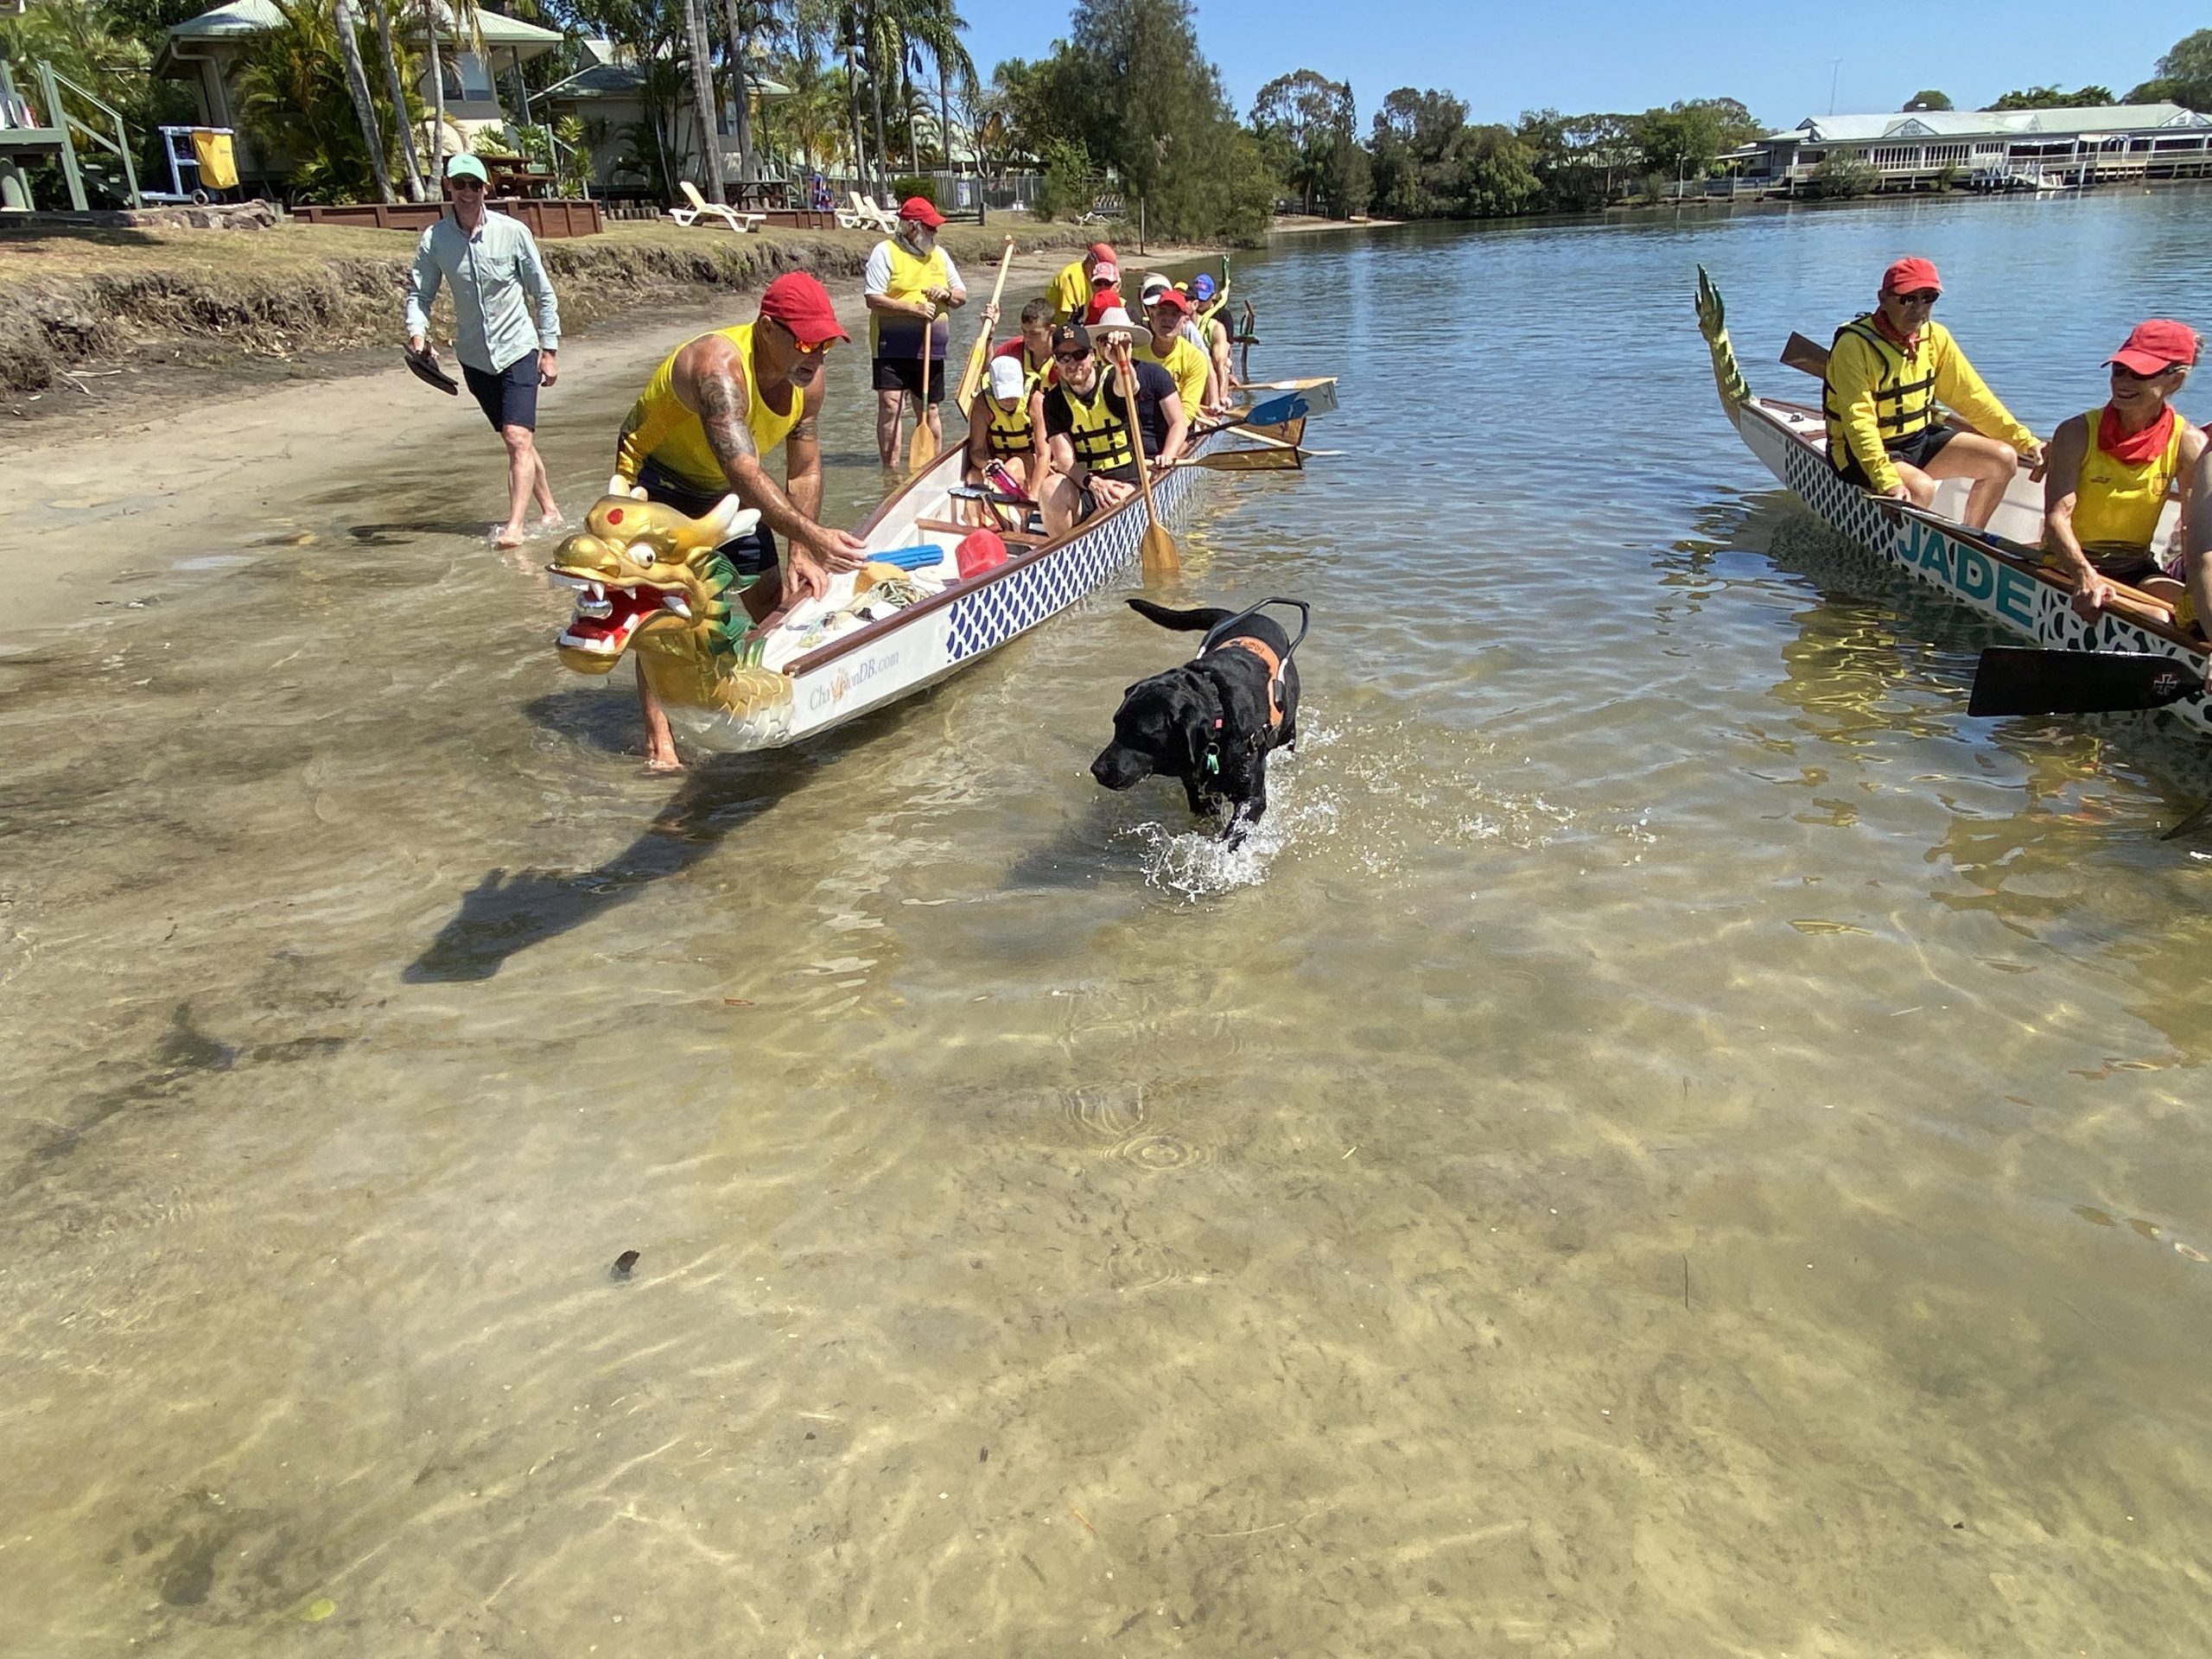 Two dragon boats full of people in the water and a guide dog walking alongside